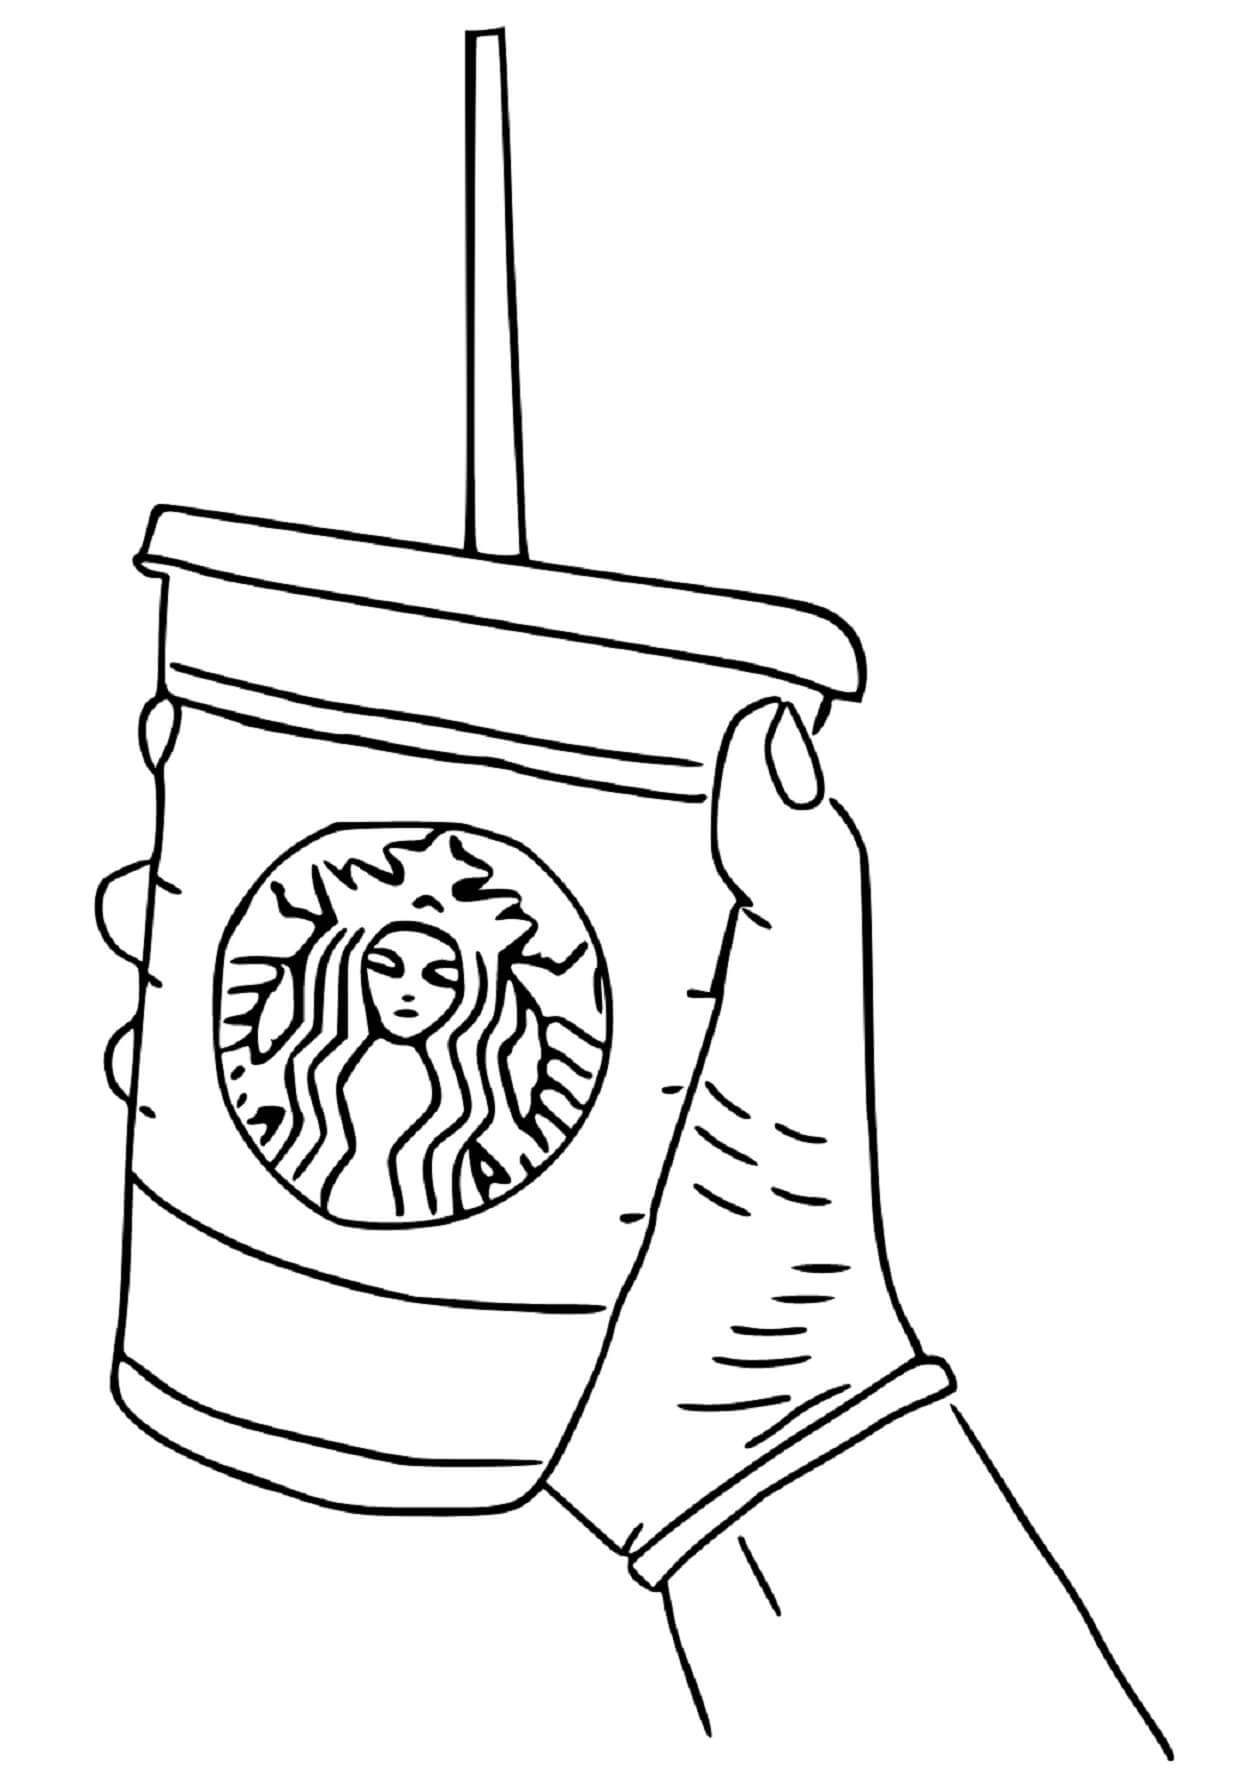 Drawing starbucks cup coloring page